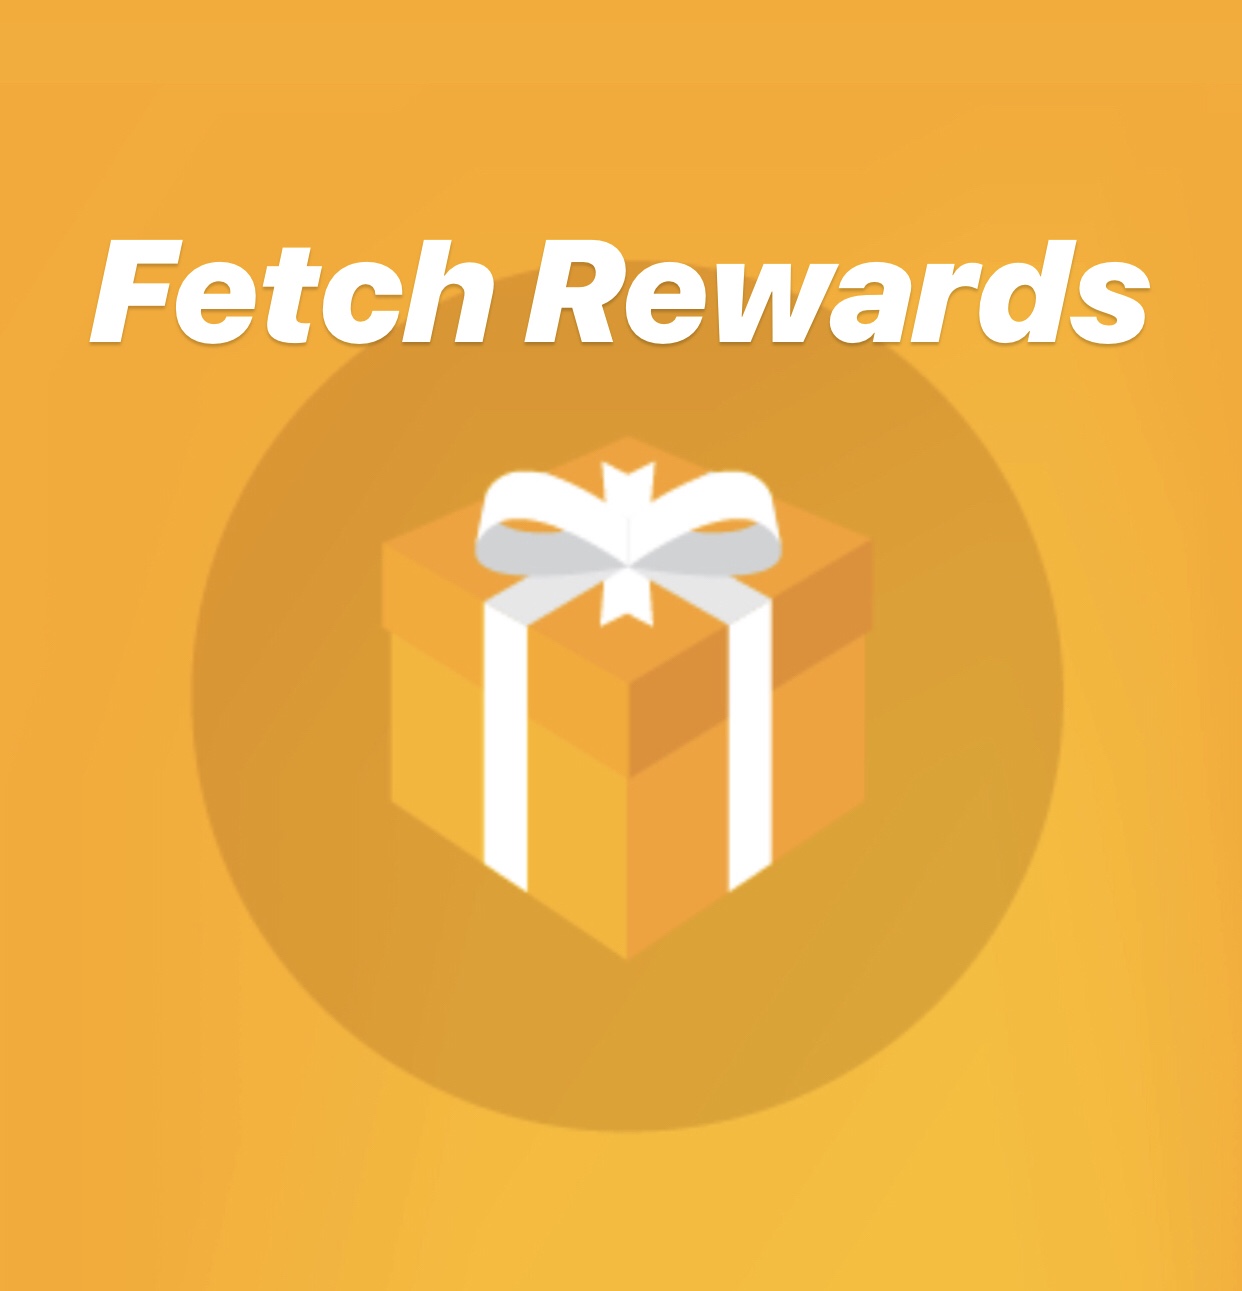 real receipts for fetch rewards